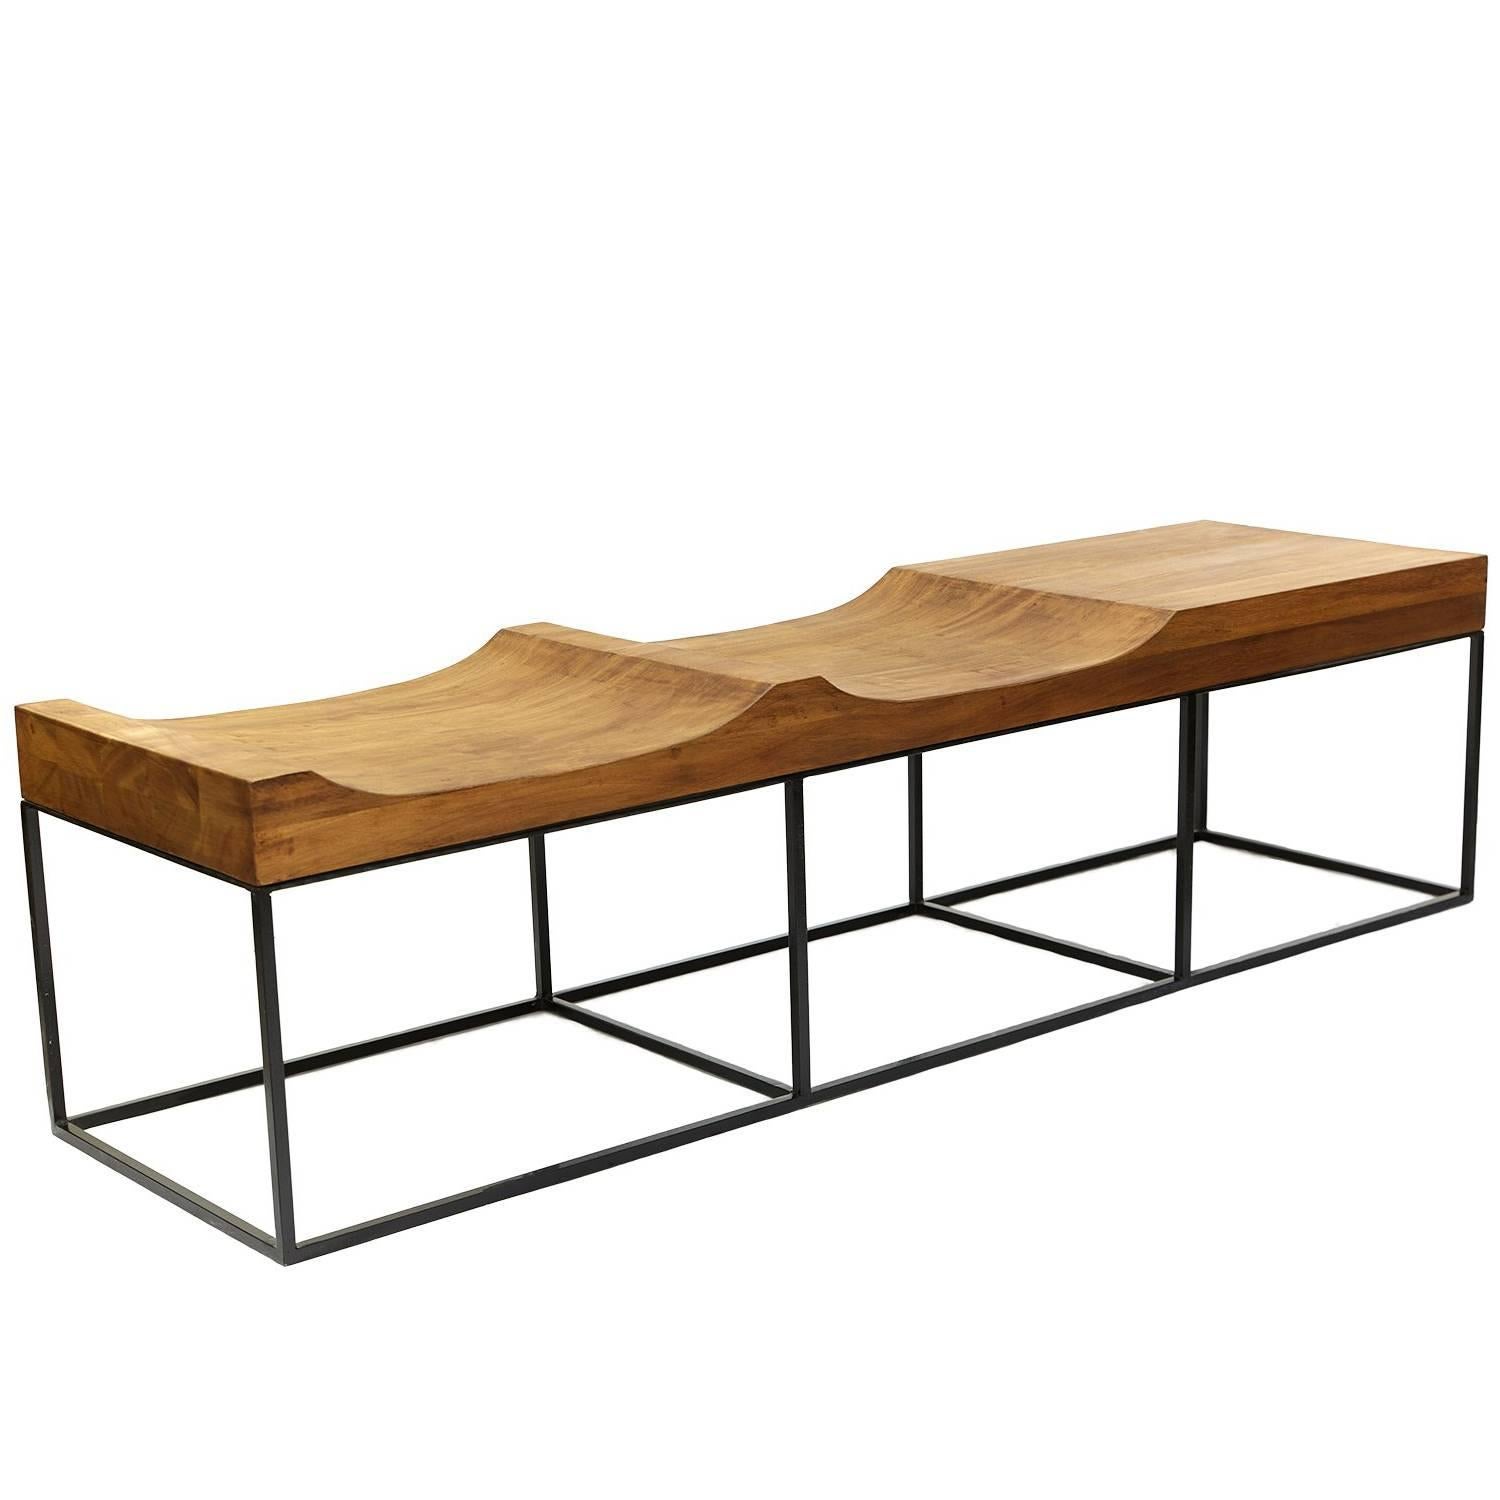 Brazilian Midcentury Inspired Marcelo Bench, Tropical Parota Wood and Steel For Sale